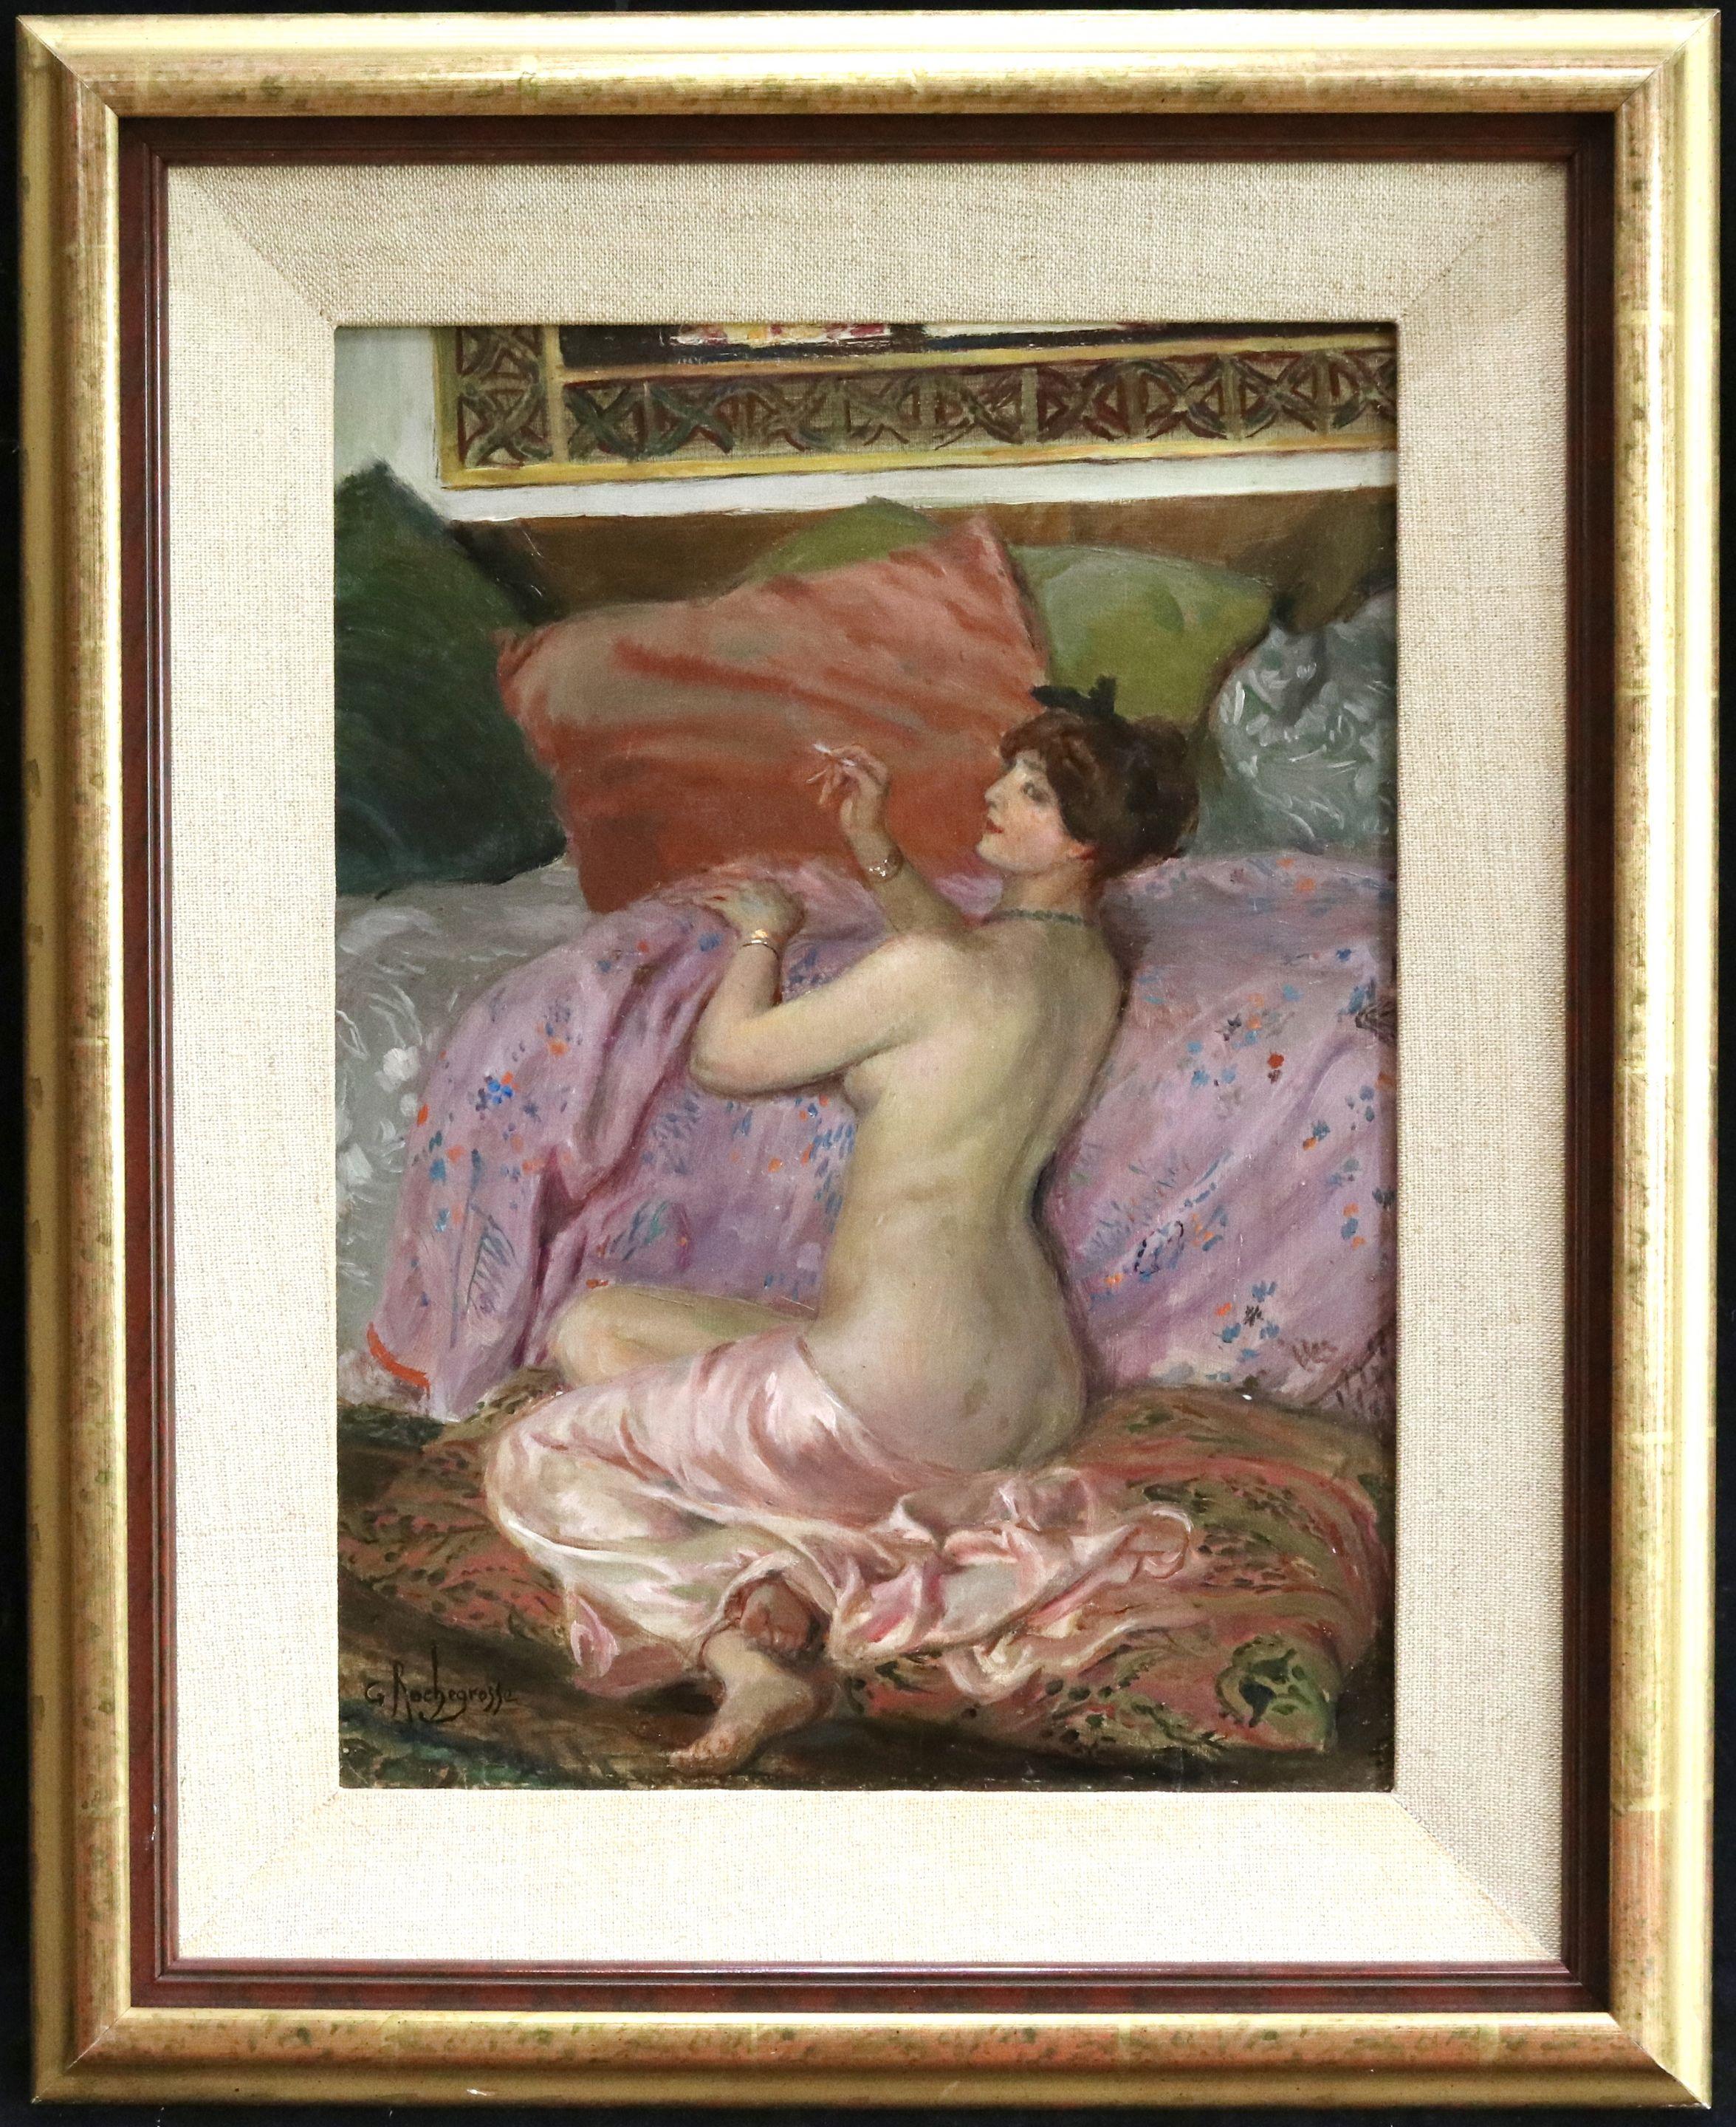 Nude Smoking a Cigarette - 19th Century Oil, Woman in Interior by Rochegrosse 1